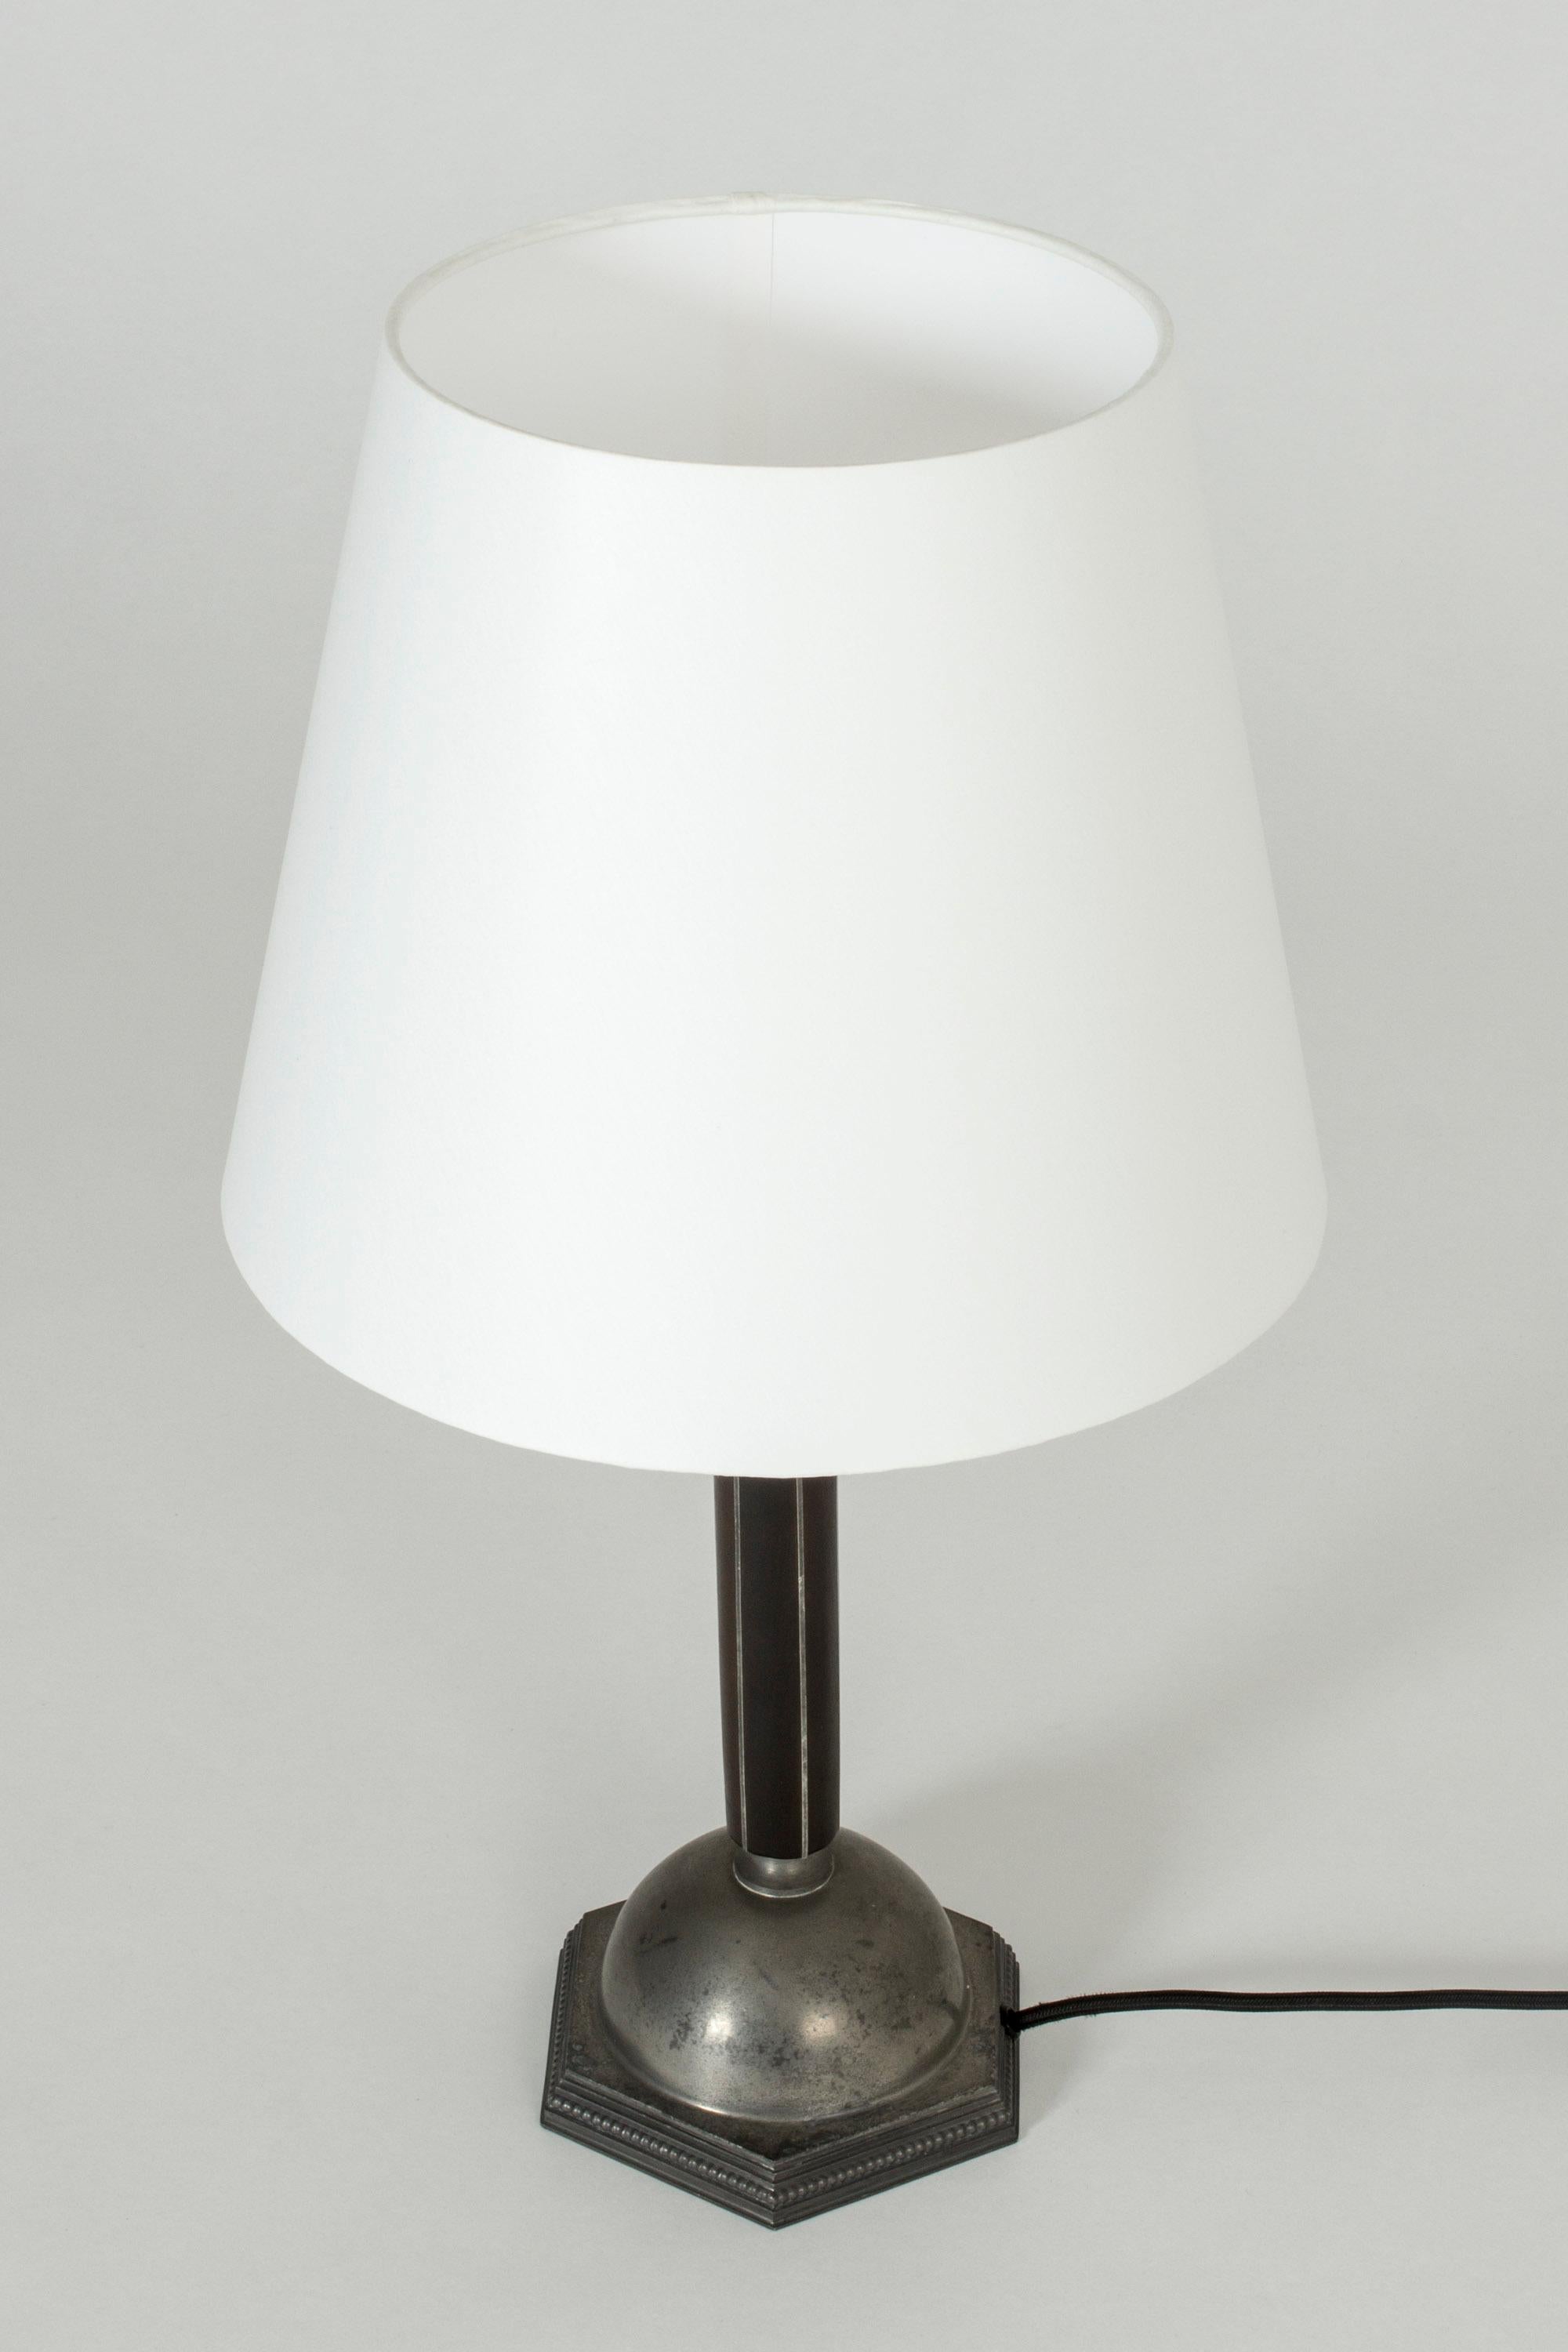 Elegant table lamp from C. G. Hallberg, made from pewter and ebony in the handle. Nicely decorated with geometric lines.